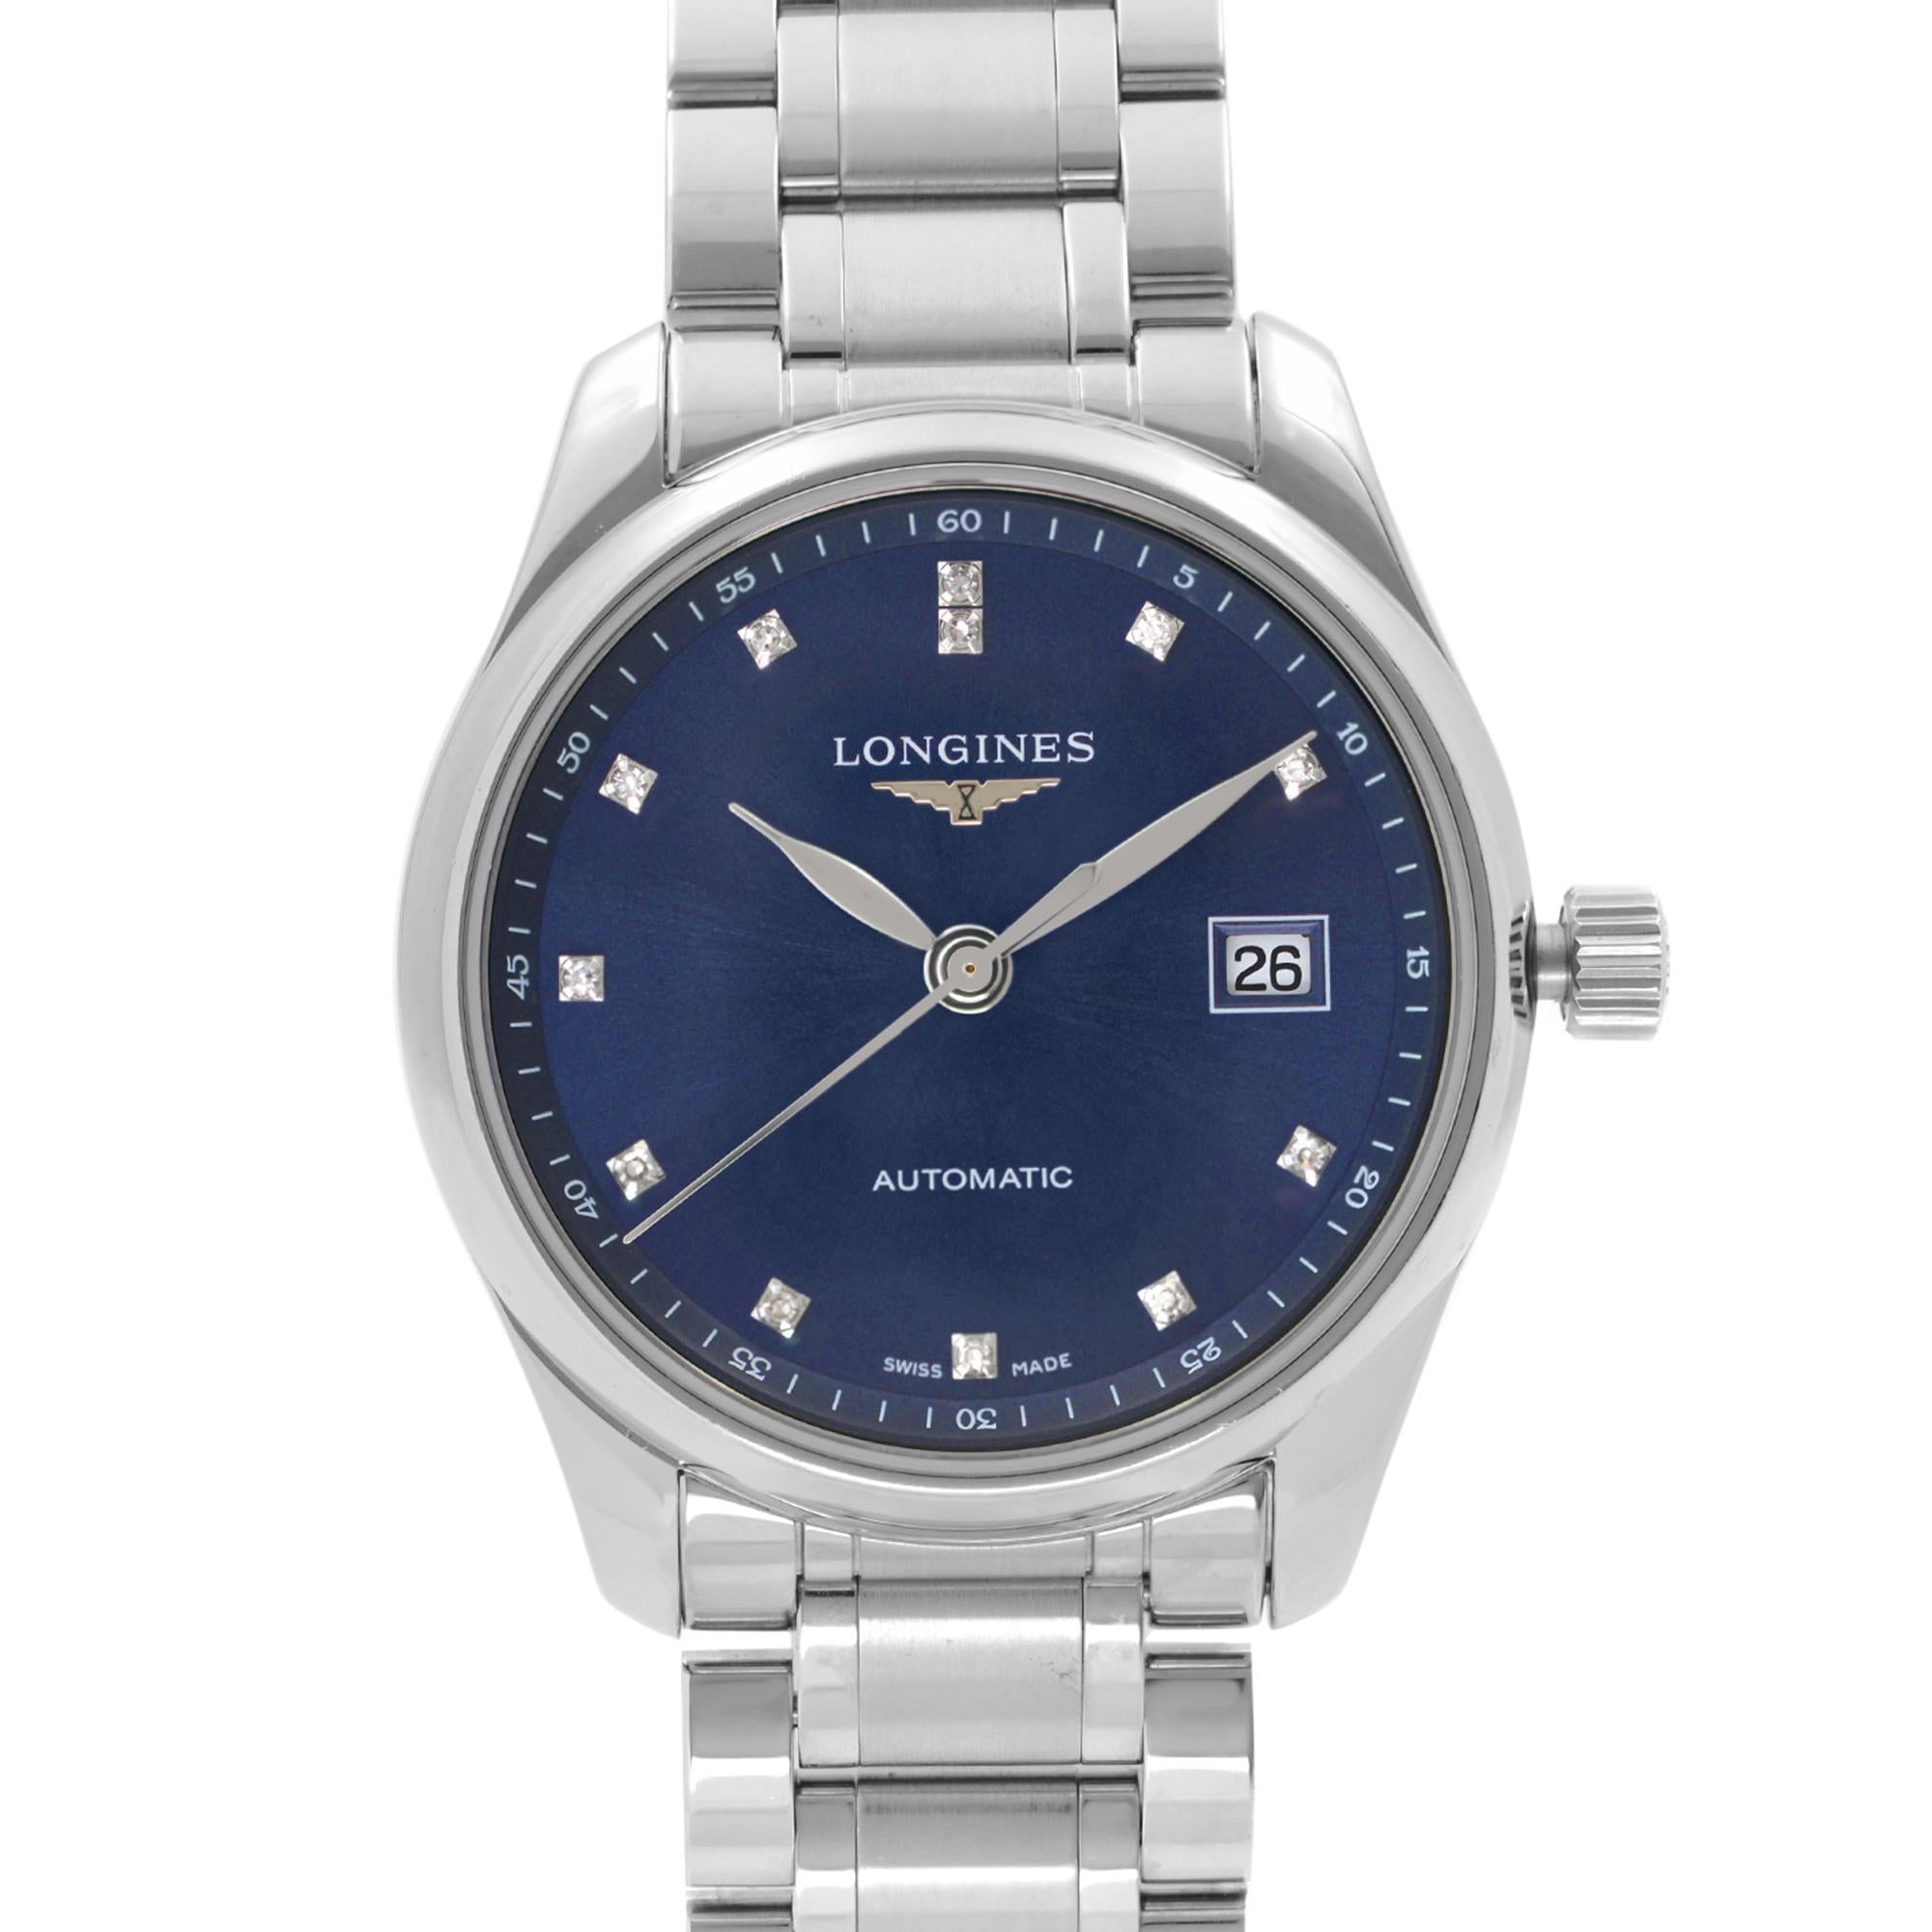 Display Model Longines Master Collection Stainless Steel Navy Blue Dial Automatic Ladies Watch L2.257.4.97.6. This Beautiful Timepiece Features Stainless Steel Case & Bracelet Fixed Stainless Steel Bezel, Navy Blue Dial with Silver-Tone Hands &